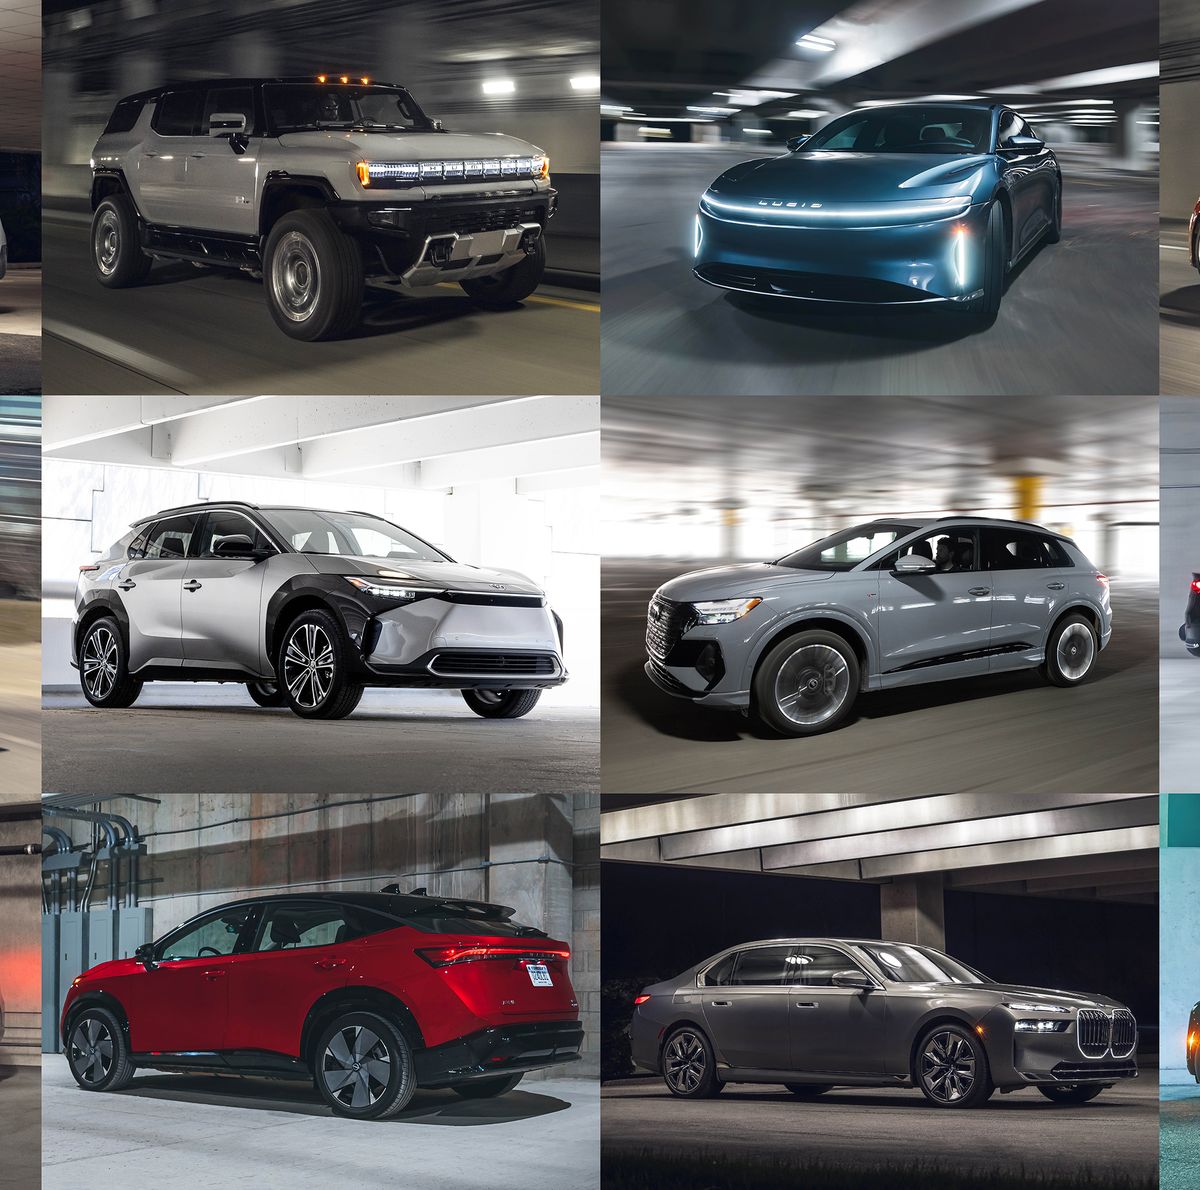 Best Electric Cars for 2022 — Car and Driver